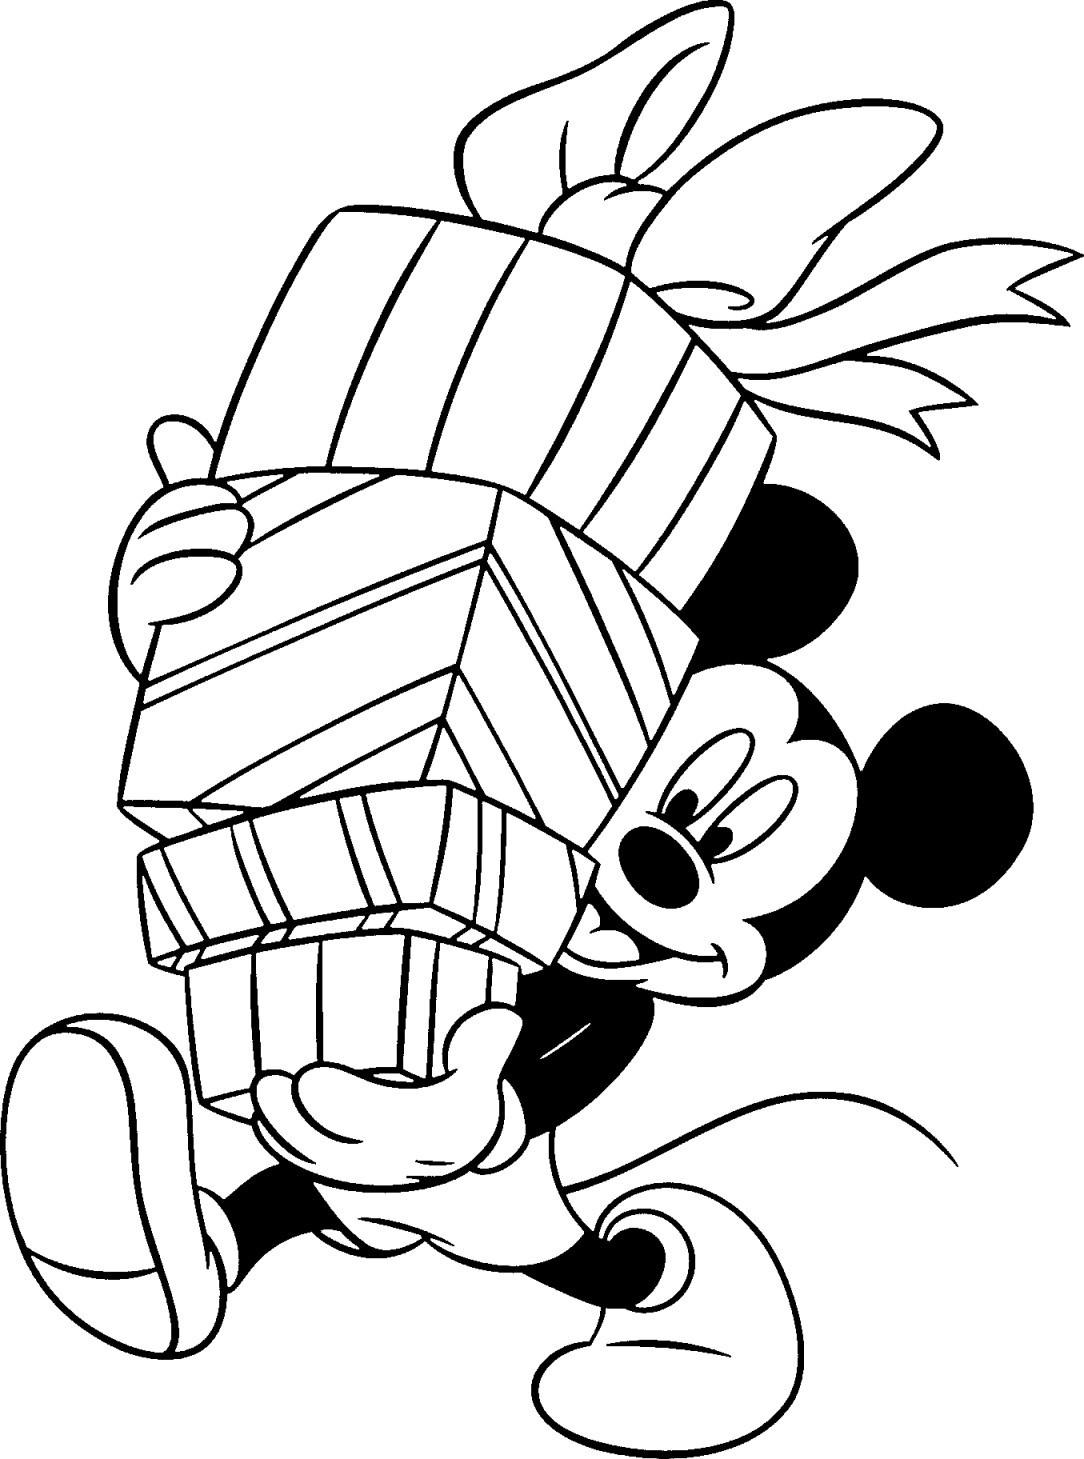 Christmas Printables Coloring Pages
 Free Disney Christmas Printable Coloring Pages for Kids